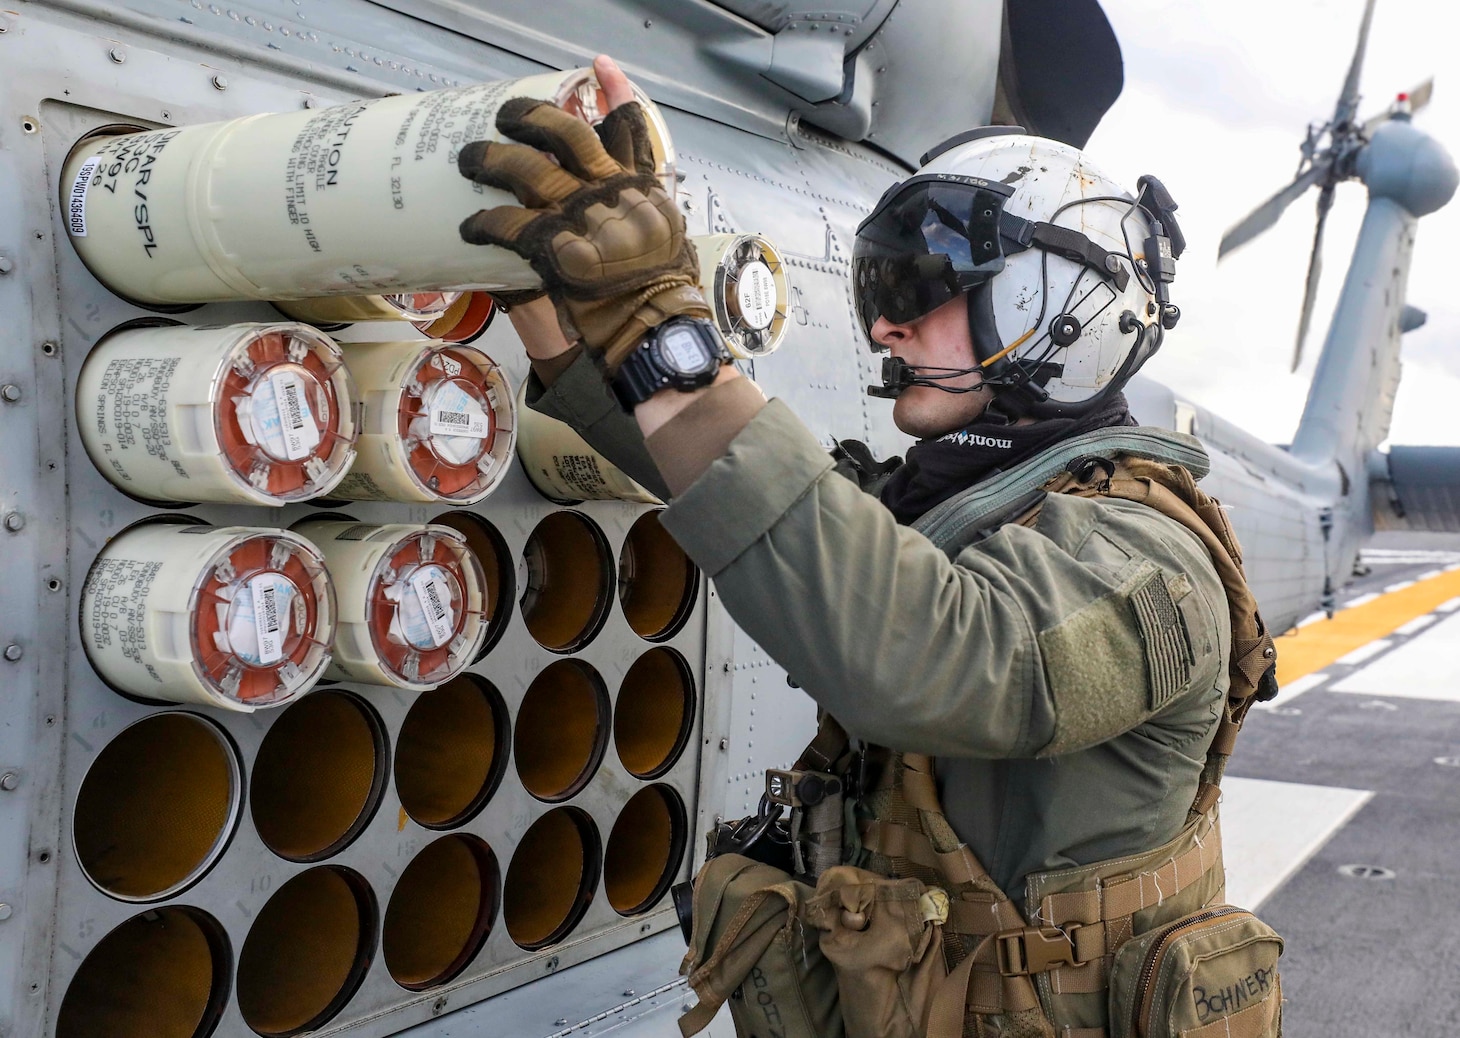 PHILIPPINE SEA (Dec. 6, 2022) Naval Air Crewman (Helicopter) 2nd Class Maxwell Bohnert inspects sonobuoys loaded into an MH-60R Sea Hawk helicopter assigned to the “Warlords” of Helicopter Maritime Strike Squadron (HSM) 51 aboard the Japan Maritime Self-Defense Force (JMSDF) multi-purpose destroyer JS Izumo (DDH 183) during a bi-lateral anti-submarine warfare (ASW) exercise, Dec. 6. The U.S. Navy and JMSDF regularly fly, sail and operate together with other Allies and partners to promote security and stability throughout the region. (U.S. Navy photo by Mass Communication Specialist 1st Class Deanna C. Gonzales)